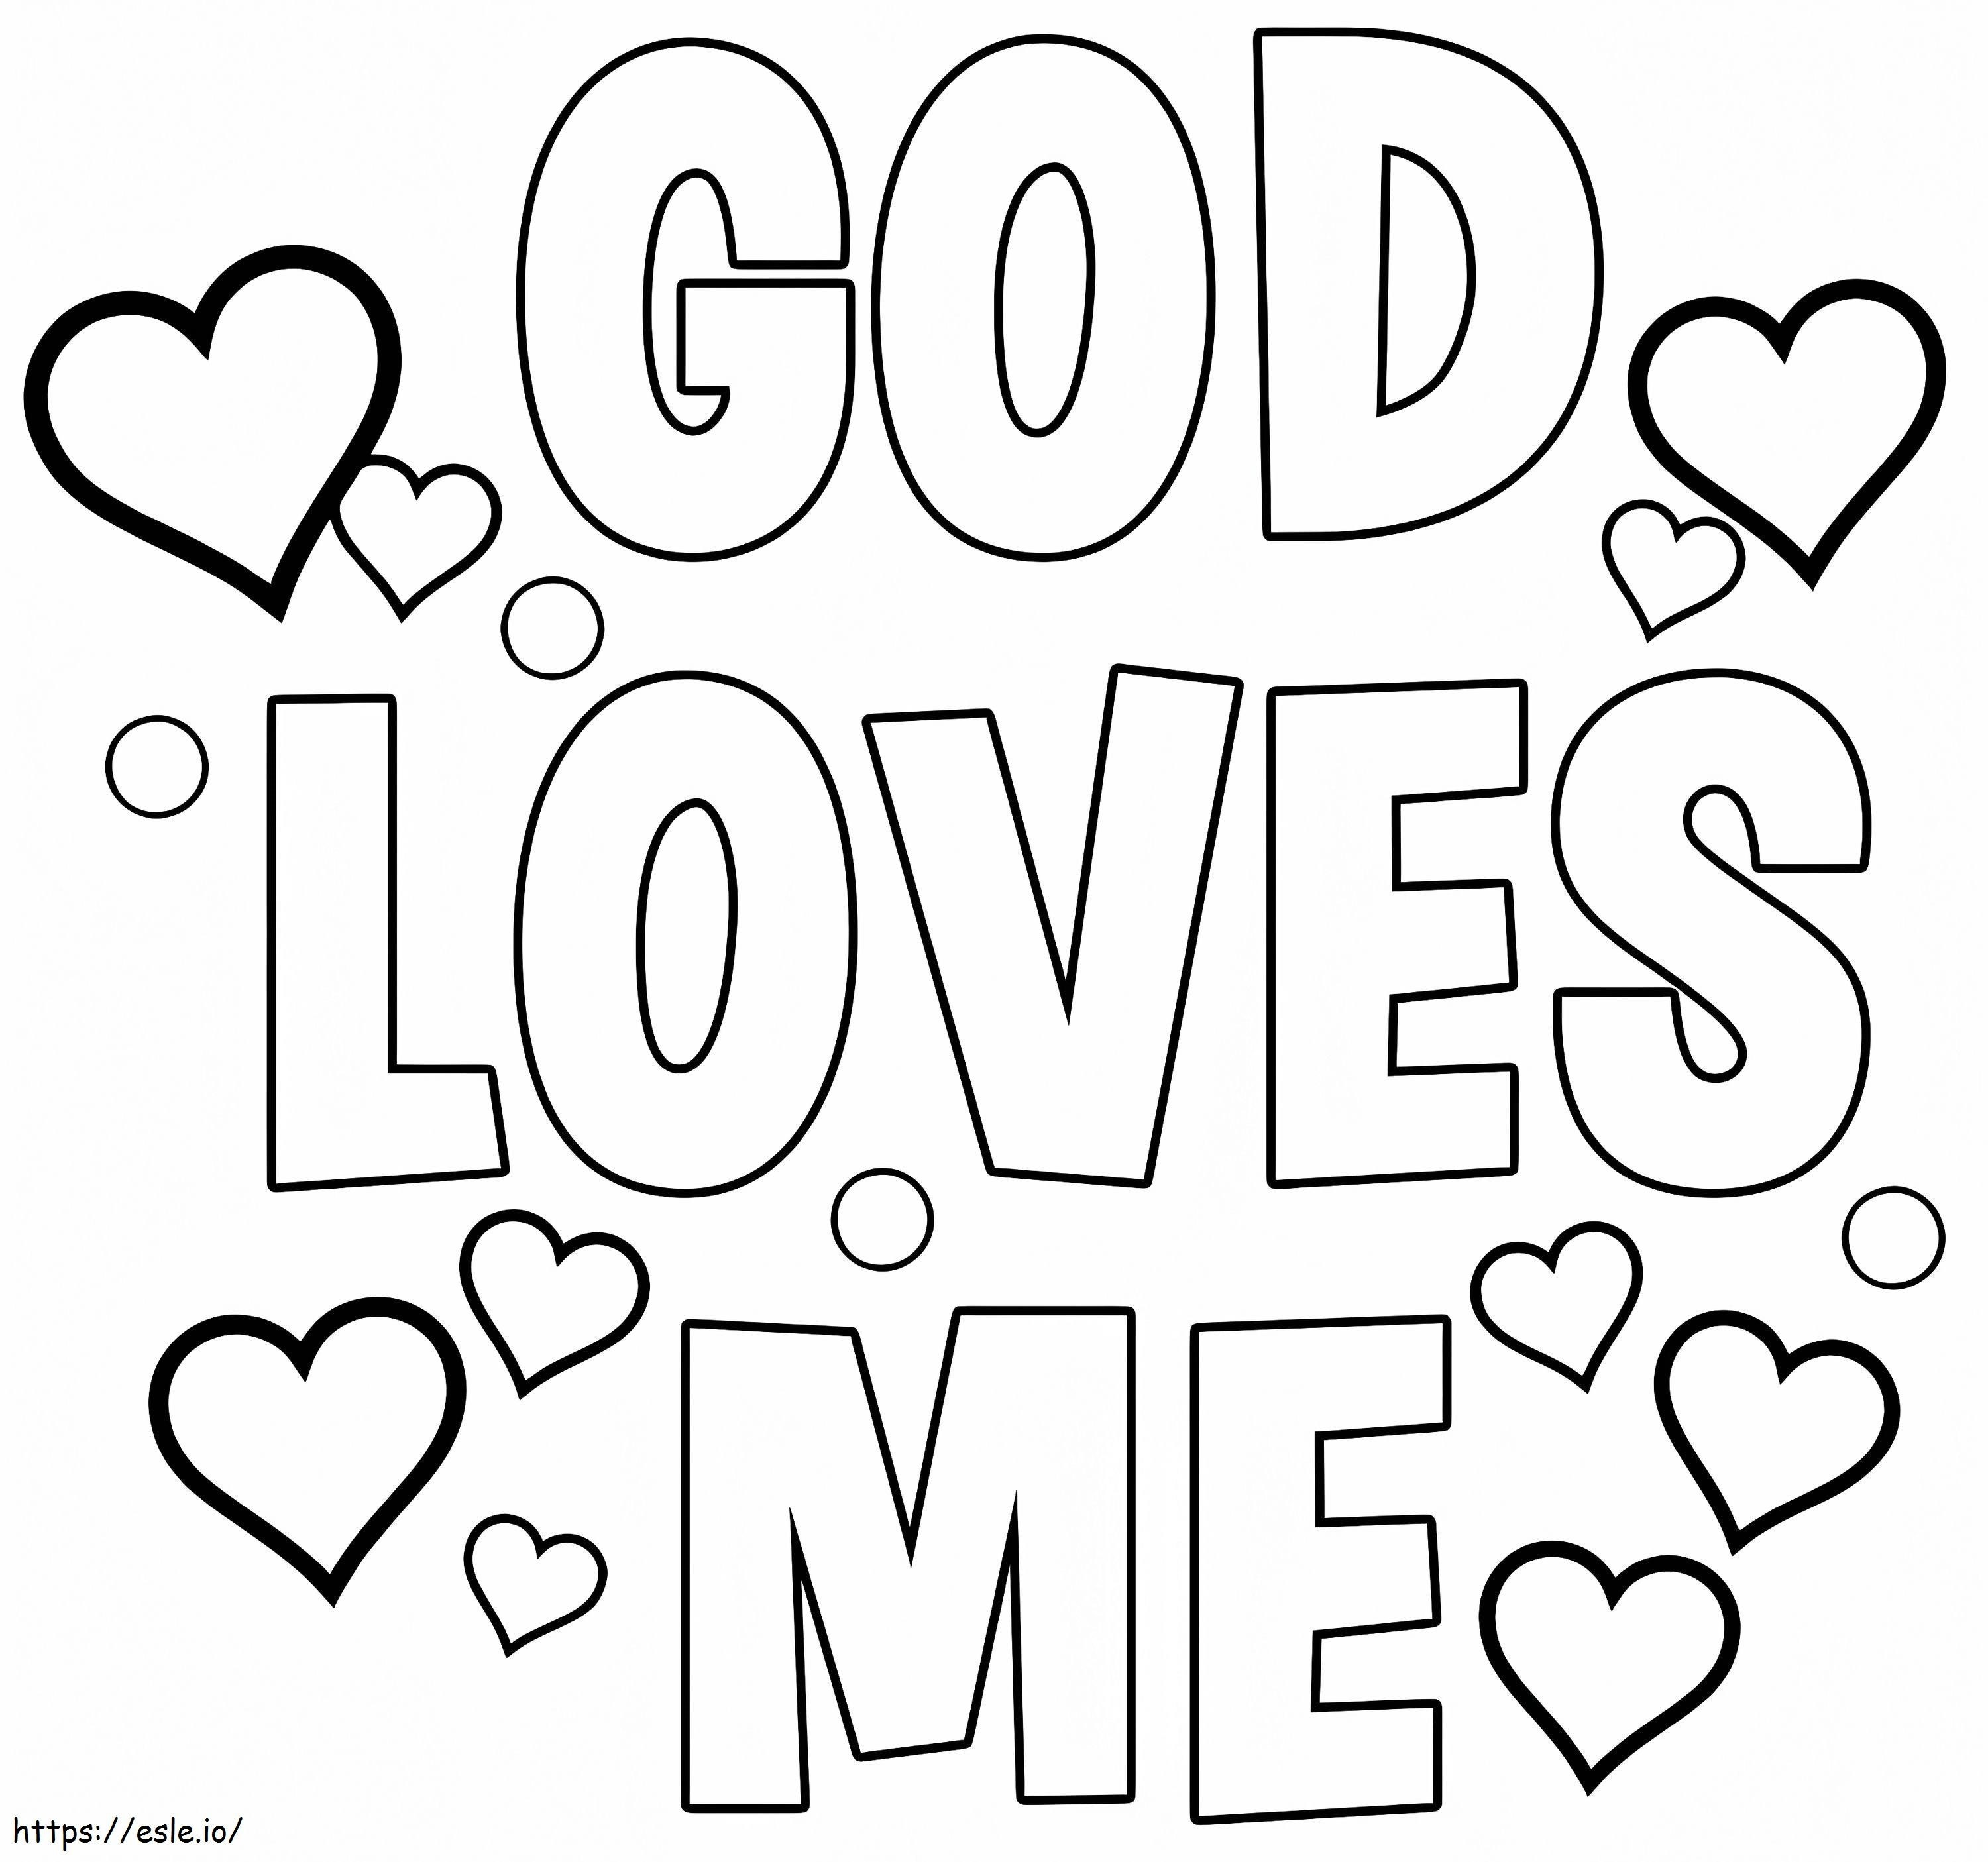 Free Printable God Loves Me coloring page